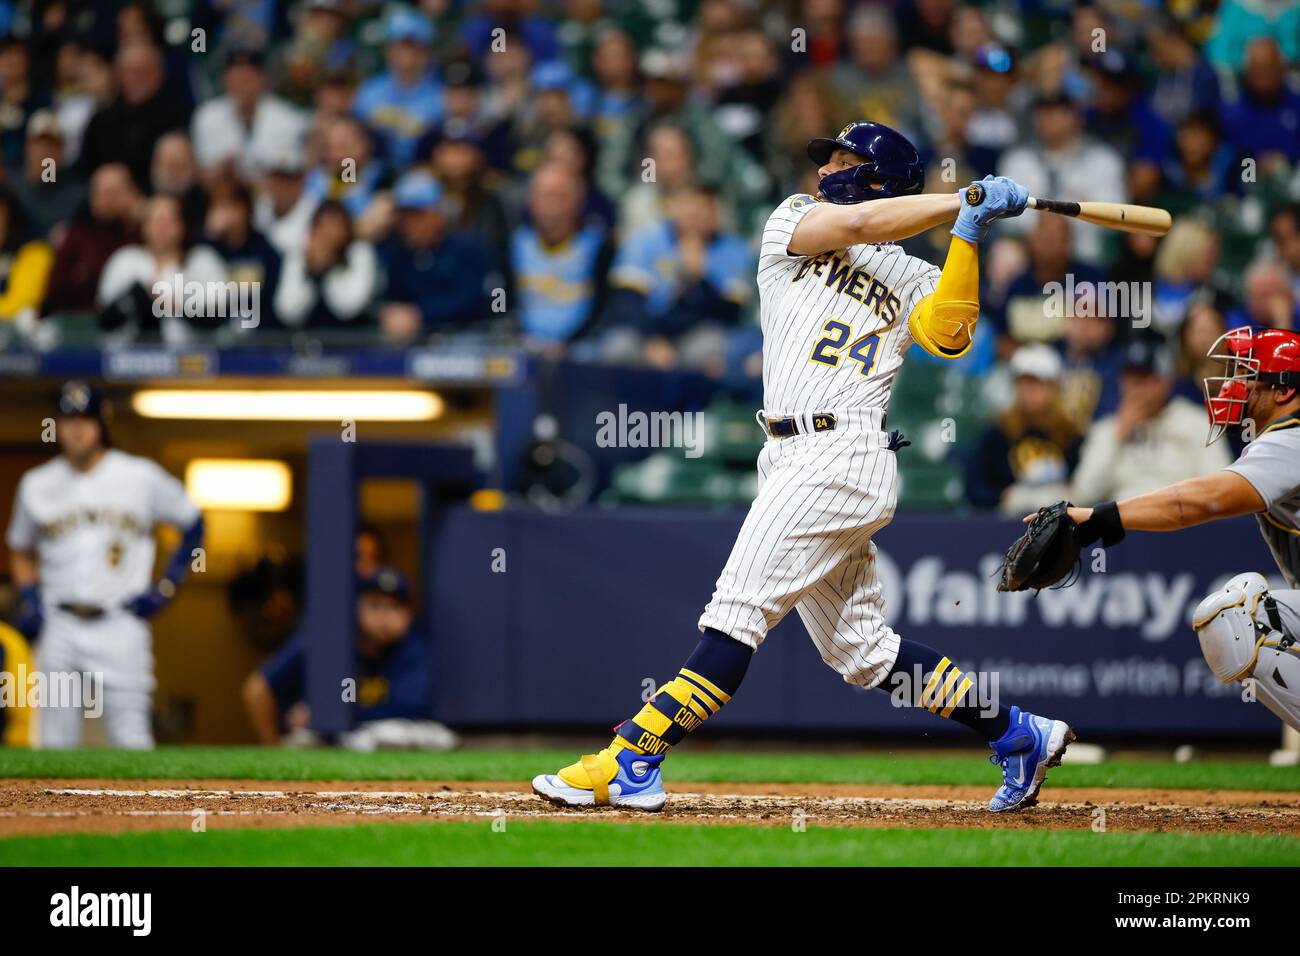 Milwaukee, United States Of America. 08th Apr, 2023. April 8, 2023:  Milwaukee Brewers catcher William Contreras (24) hits a ball during the game  between the Milwaukee Brewers and the St. Louis Cardinals